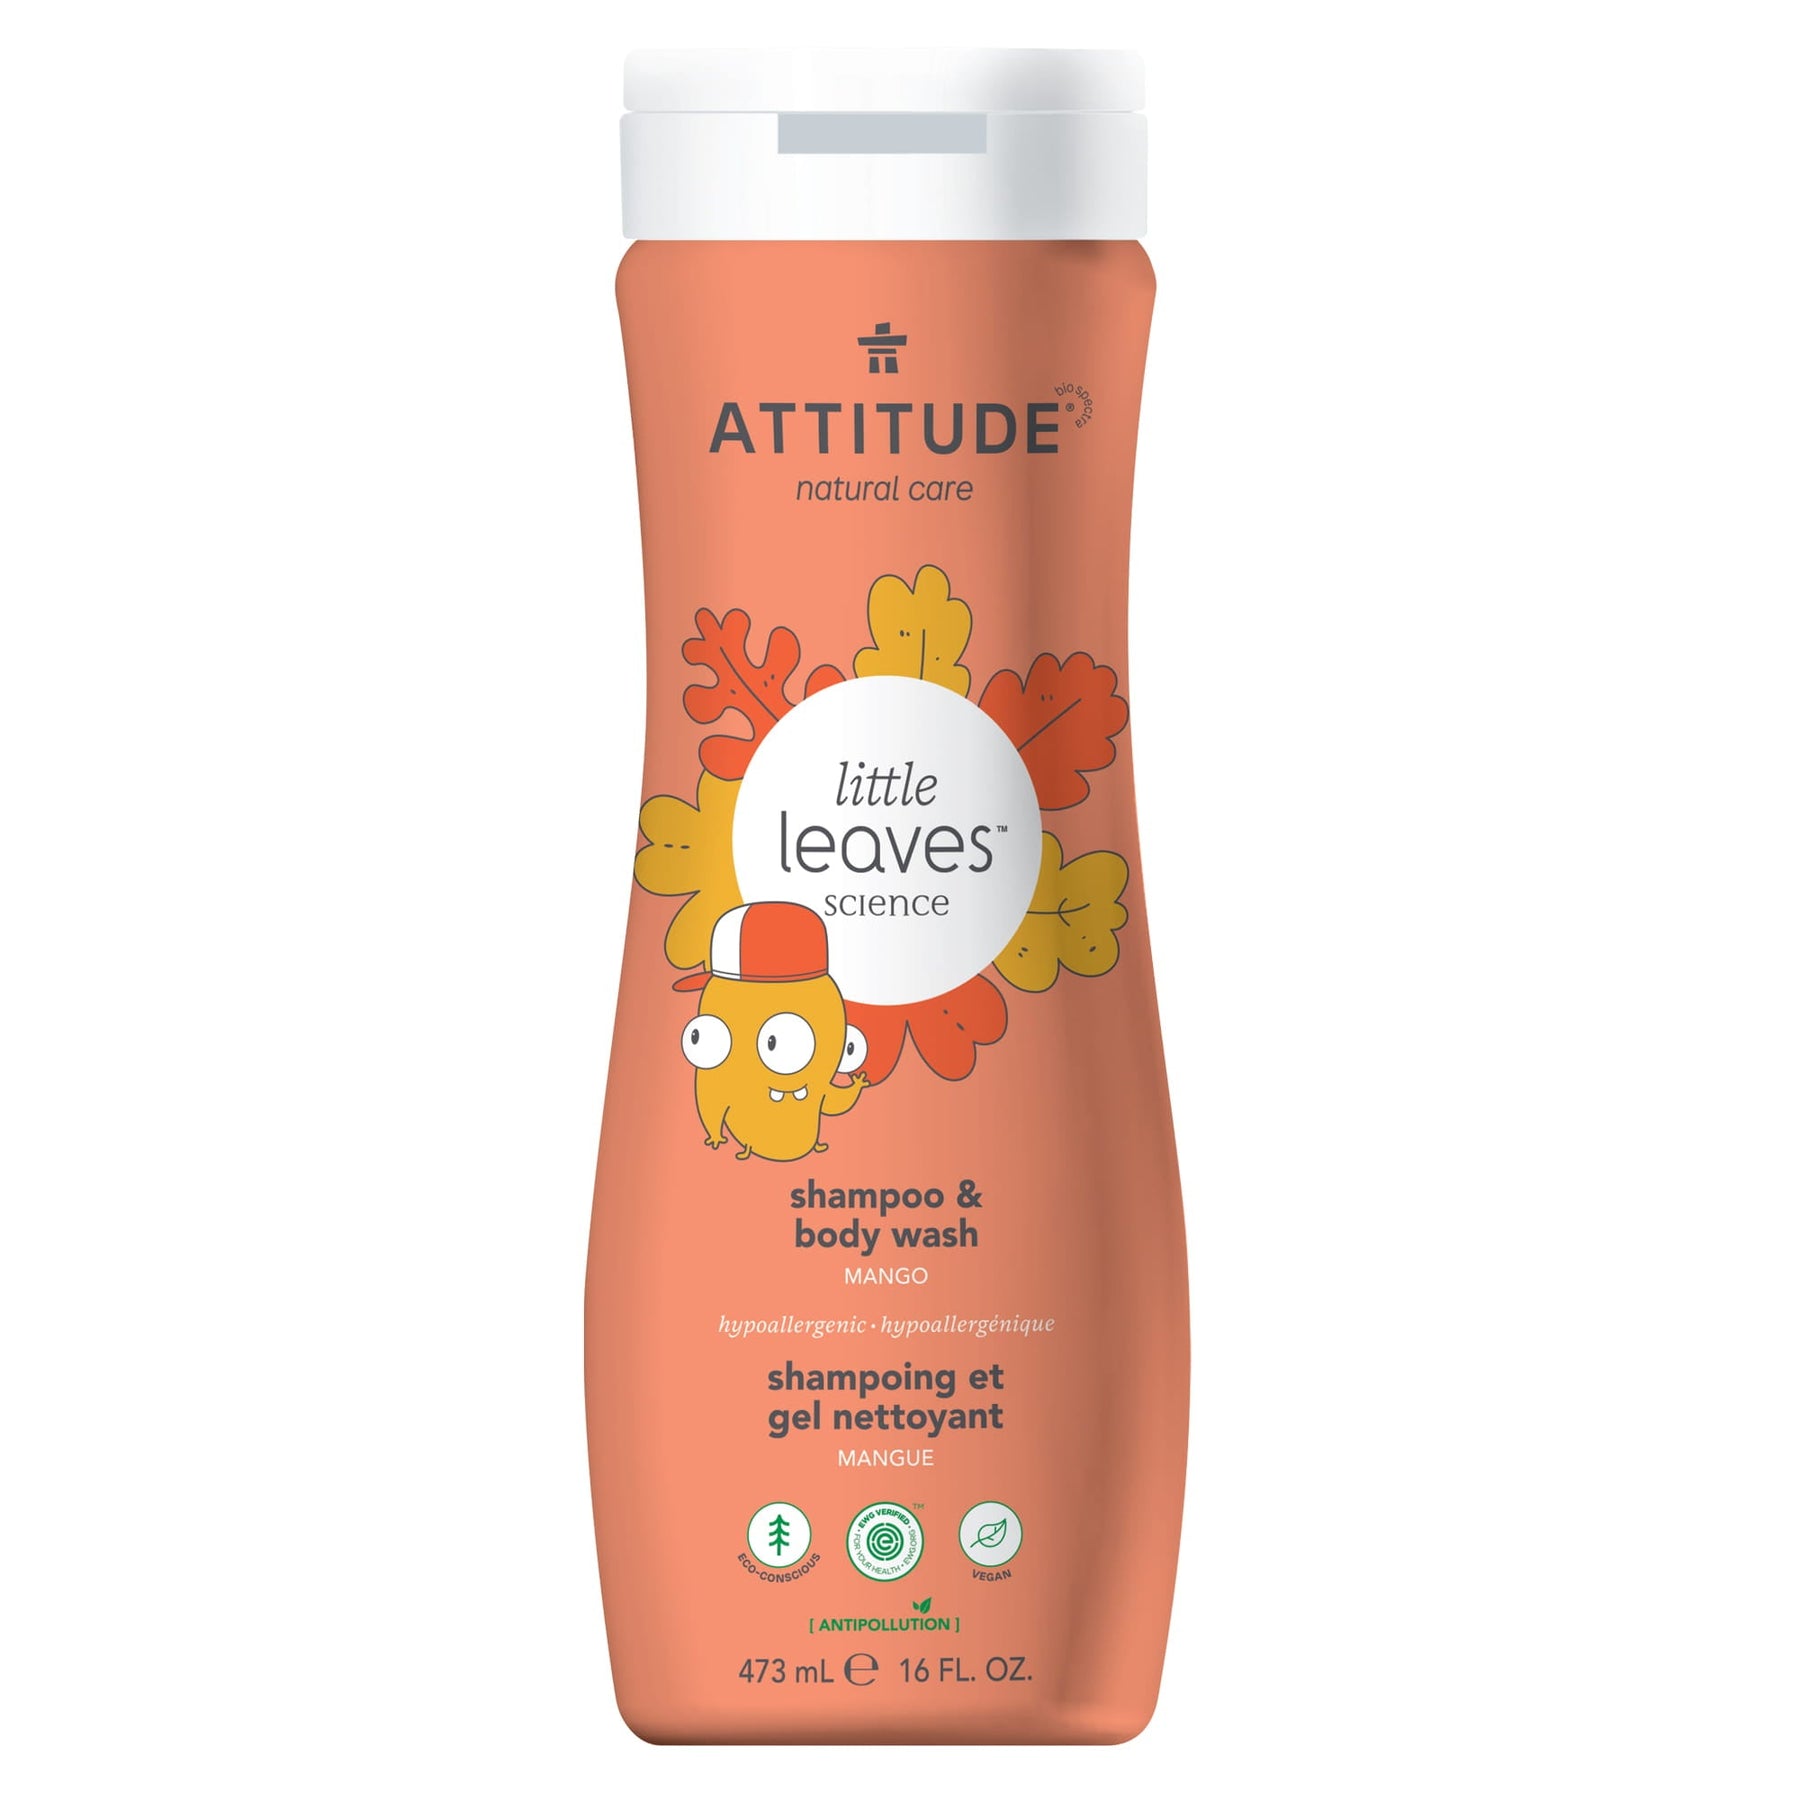 Shampoo and Body Wash 2-in-1 for kids : LITTLE LEAVES™ - Mango / 473 mL - by ATTITUDE |ProCare Outlet|